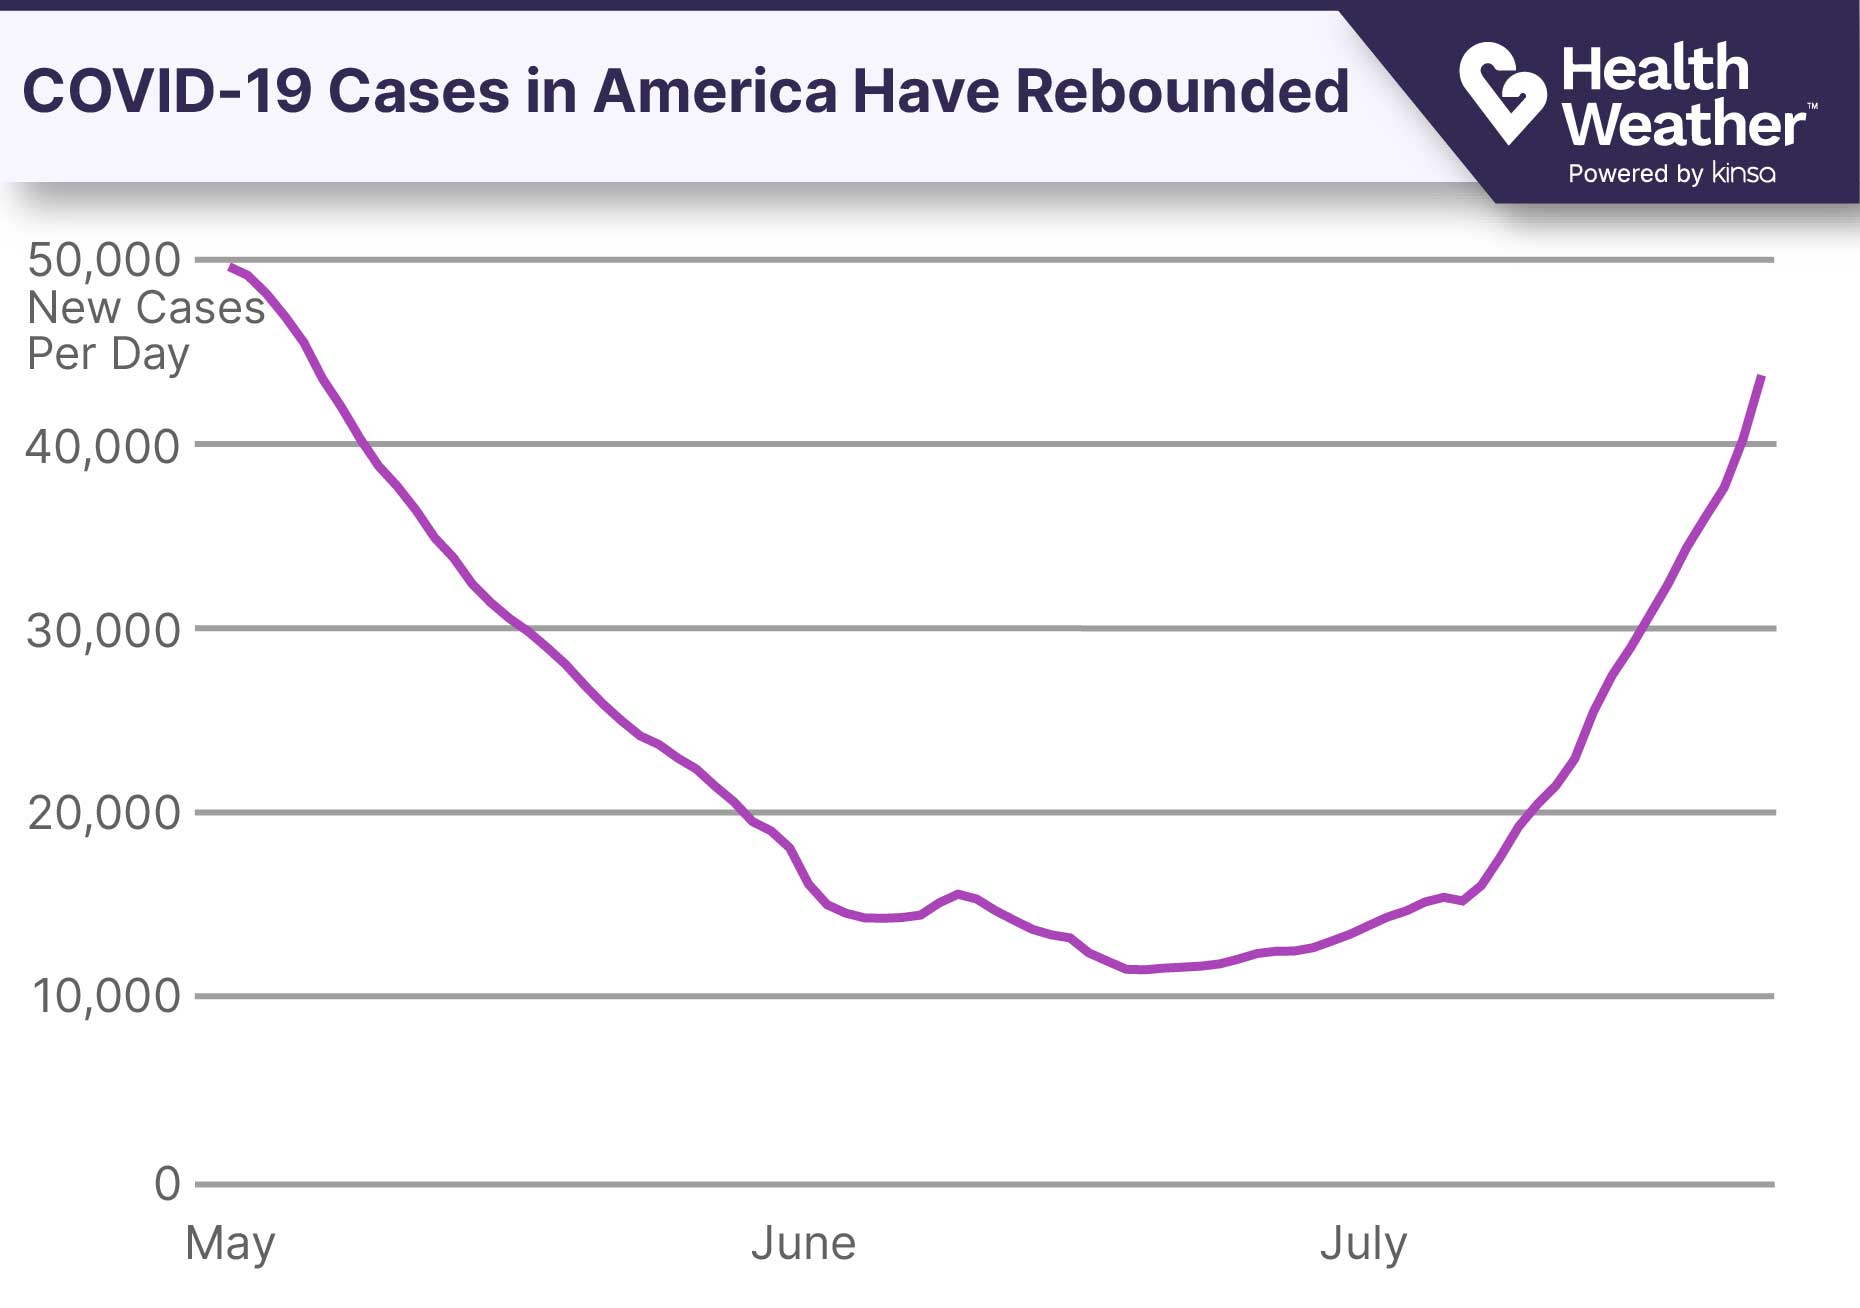 Line Chart showing covid-19 cases in the US over the last three months